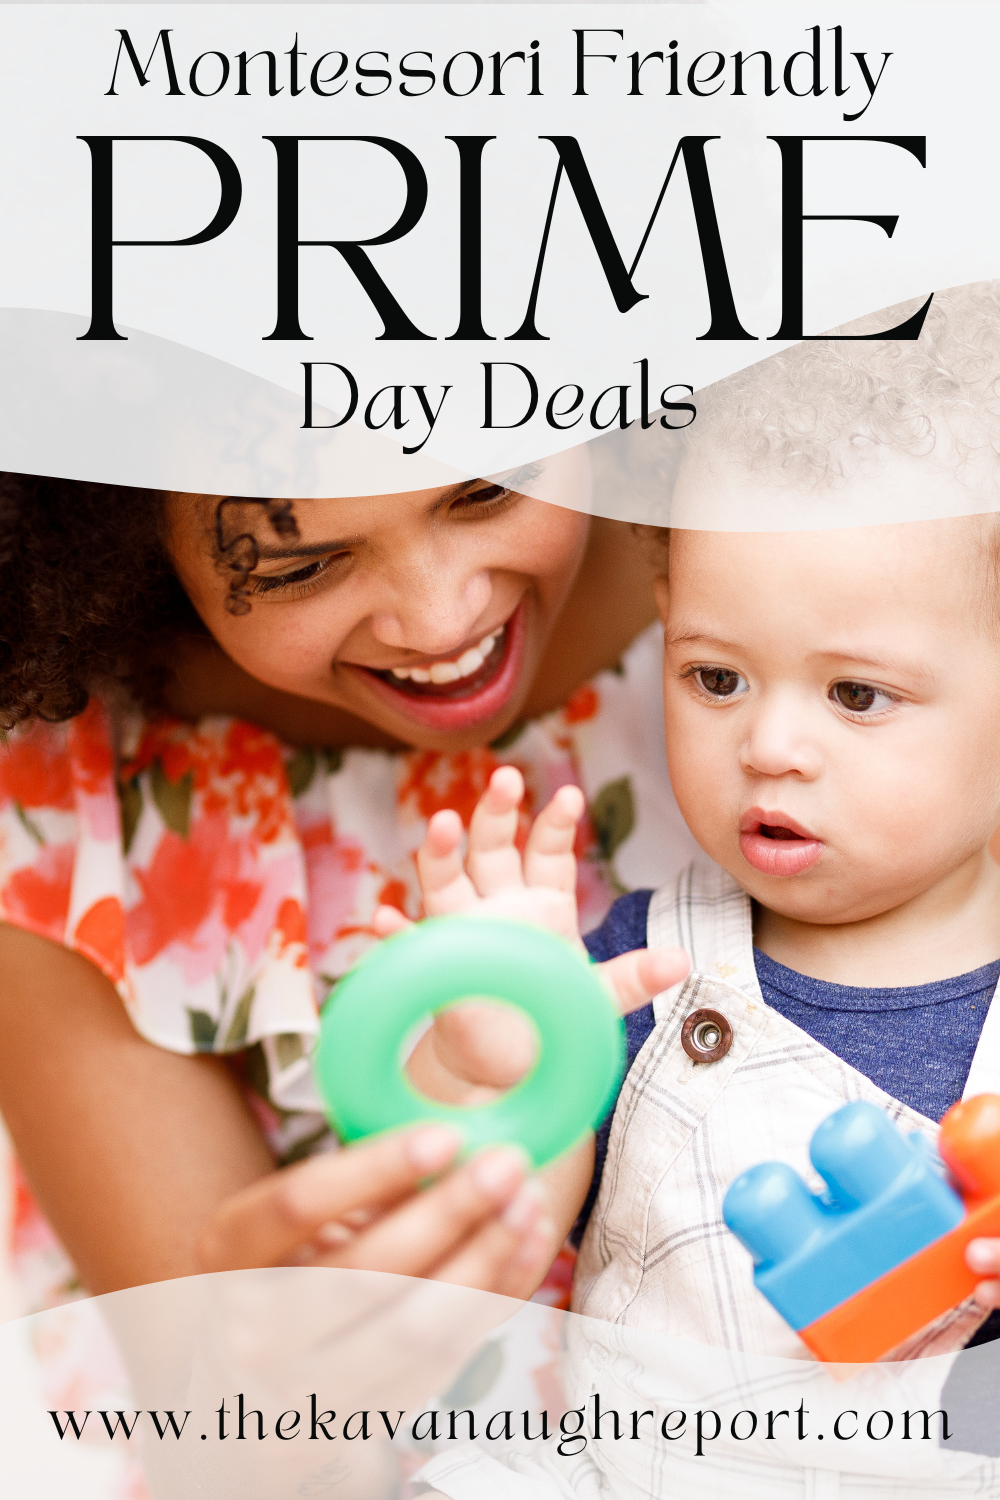 All the best Montessori Prime Day deals from Amazon, Target, Walmart and more from an experienced Montessori mom and parent educator. These are the Montessori deals you don't want to miss.